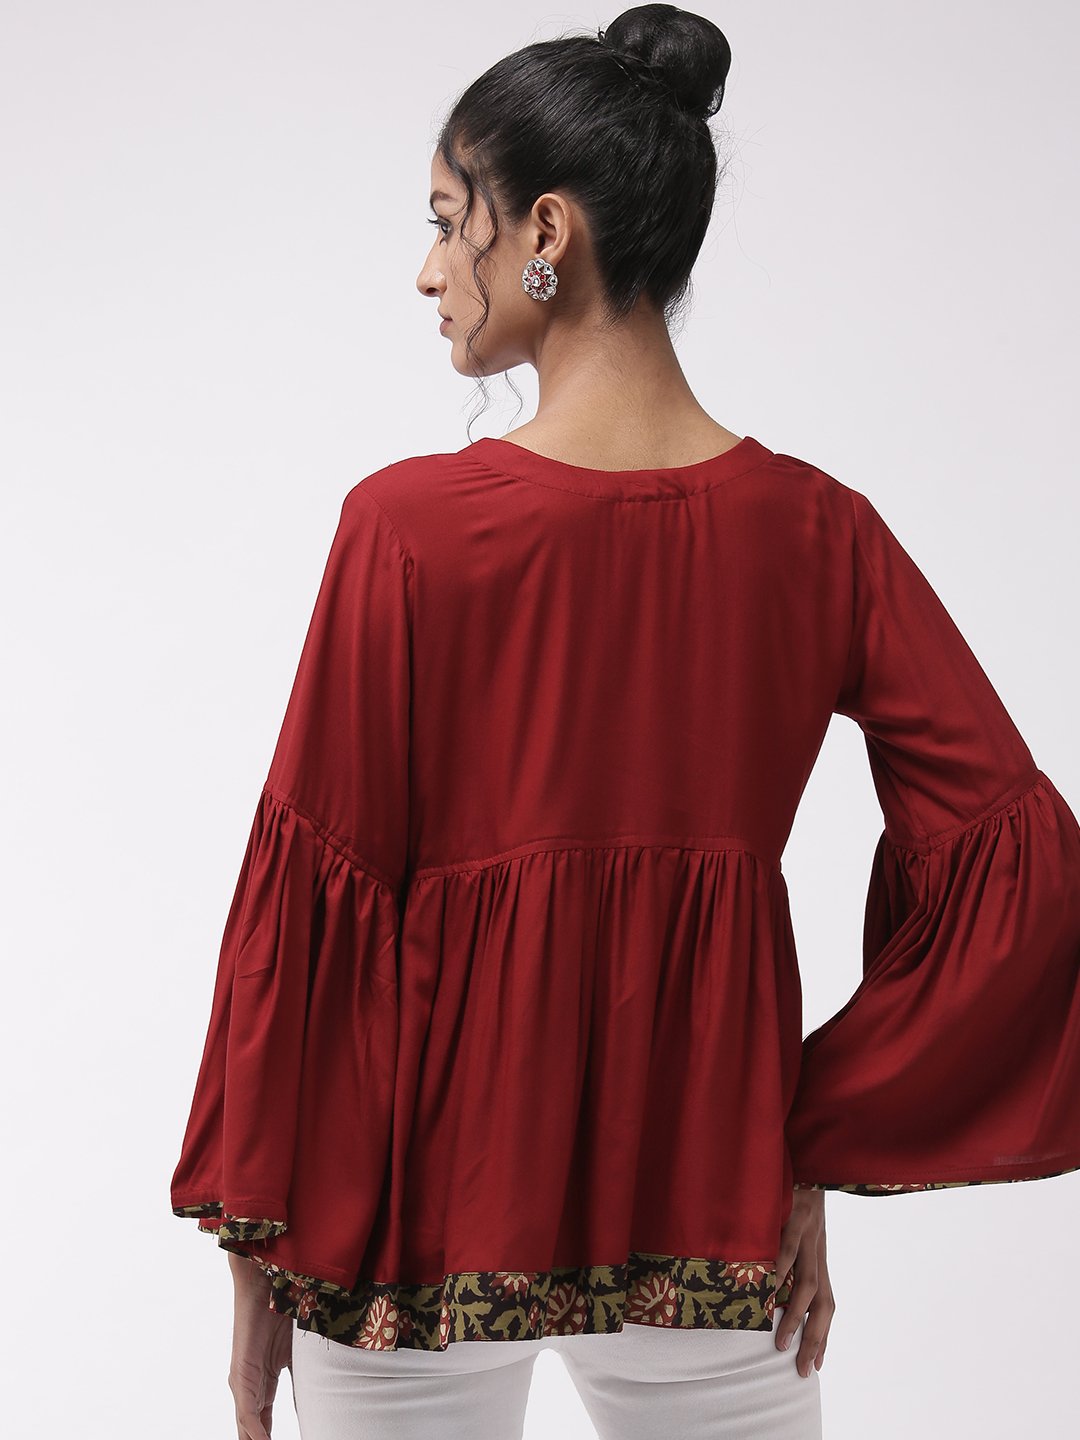 Maroon Bell Sleeves Top With Border